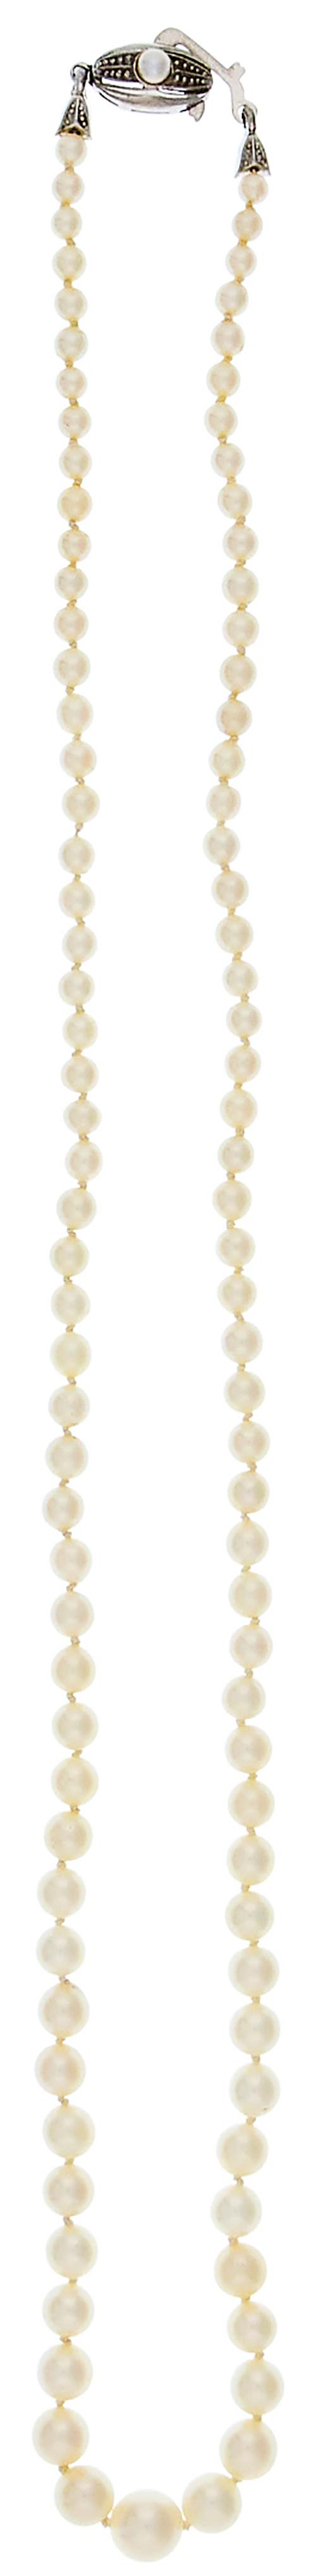 Necklaces Cultured pearl necklace ... 